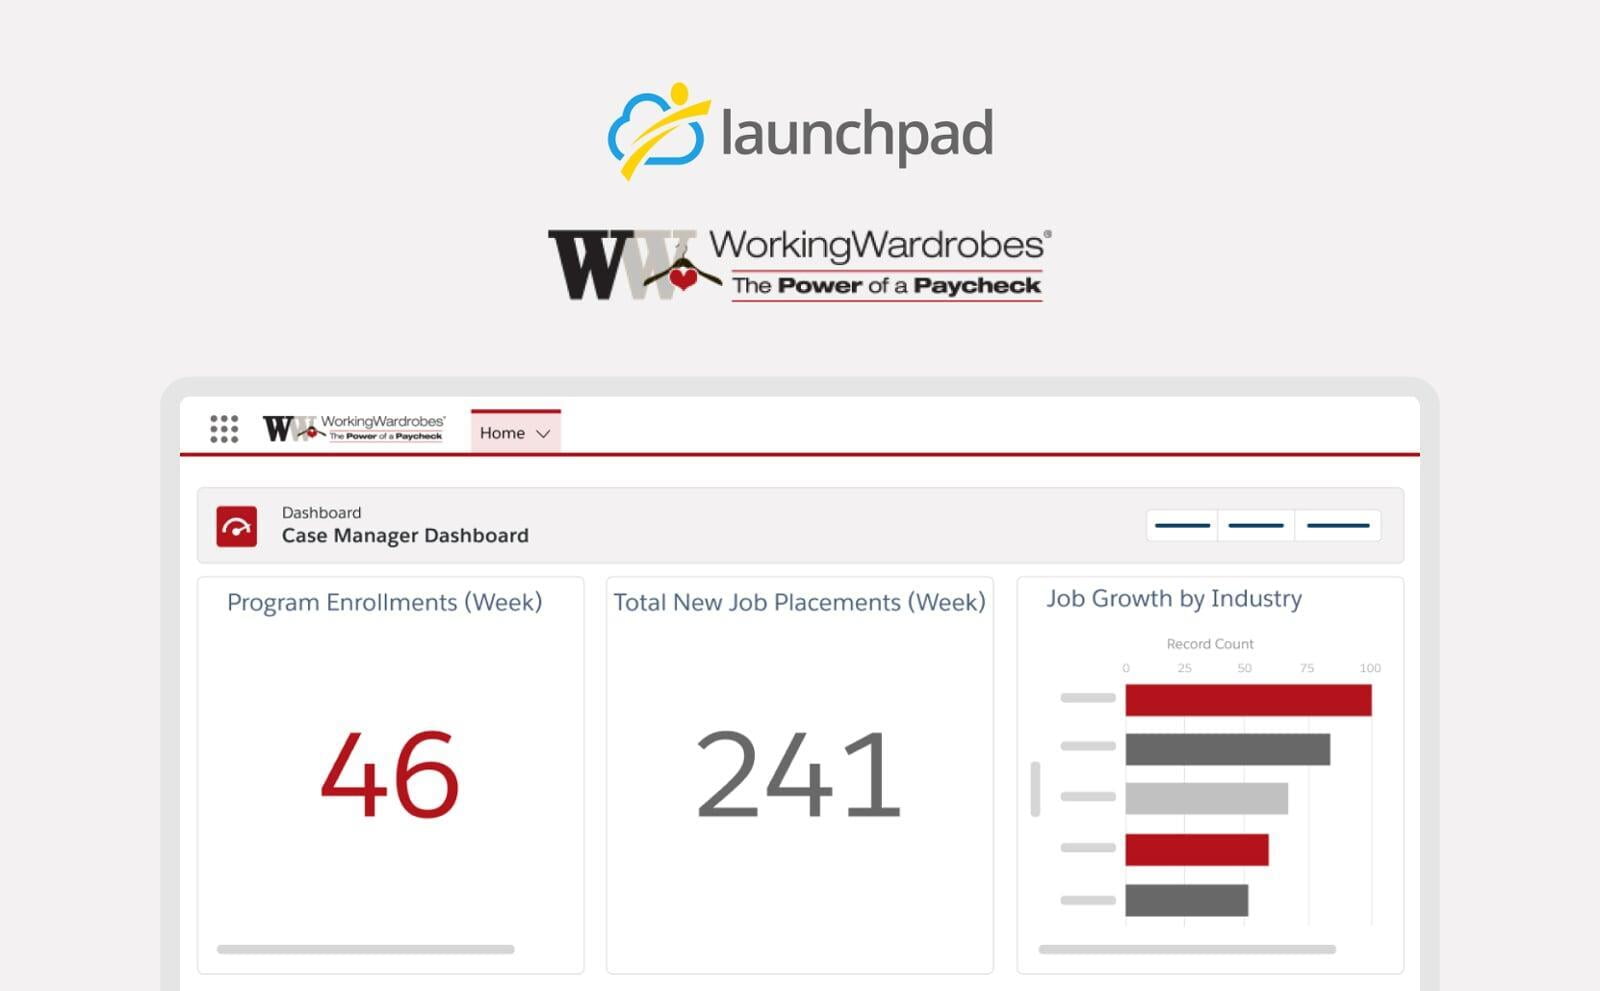 Launchpad Provides Working Wardrobes with Workforce Technology for the Launch of the Nonprofit’s Career Success Center in Orange County